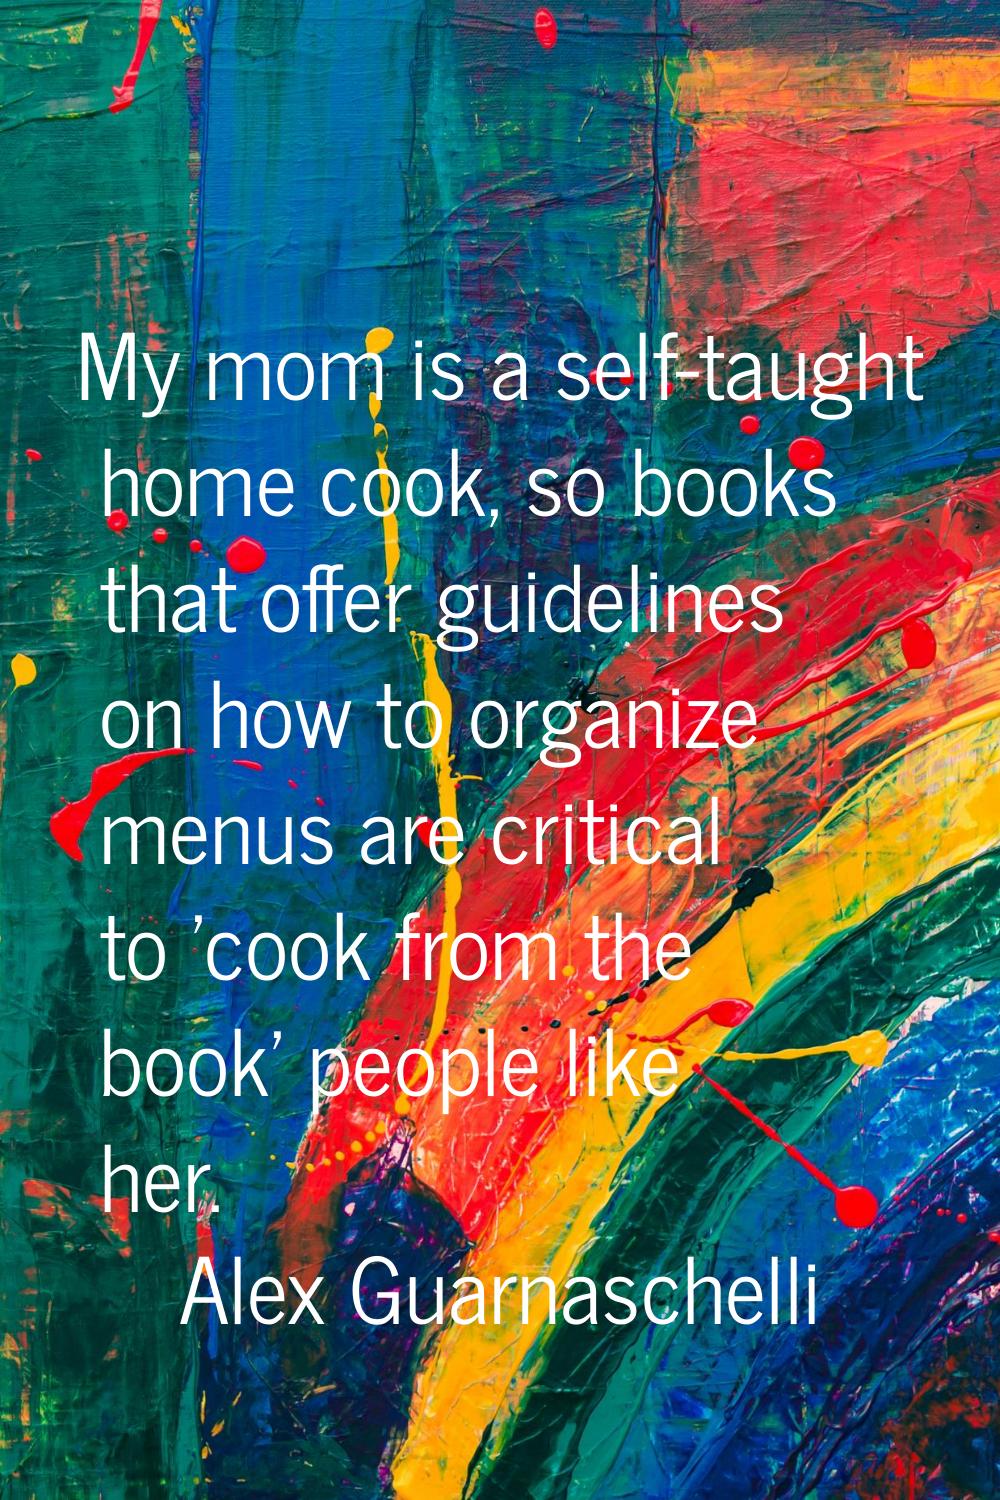 My mom is a self-taught home cook, so books that offer guidelines on how to organize menus are crit